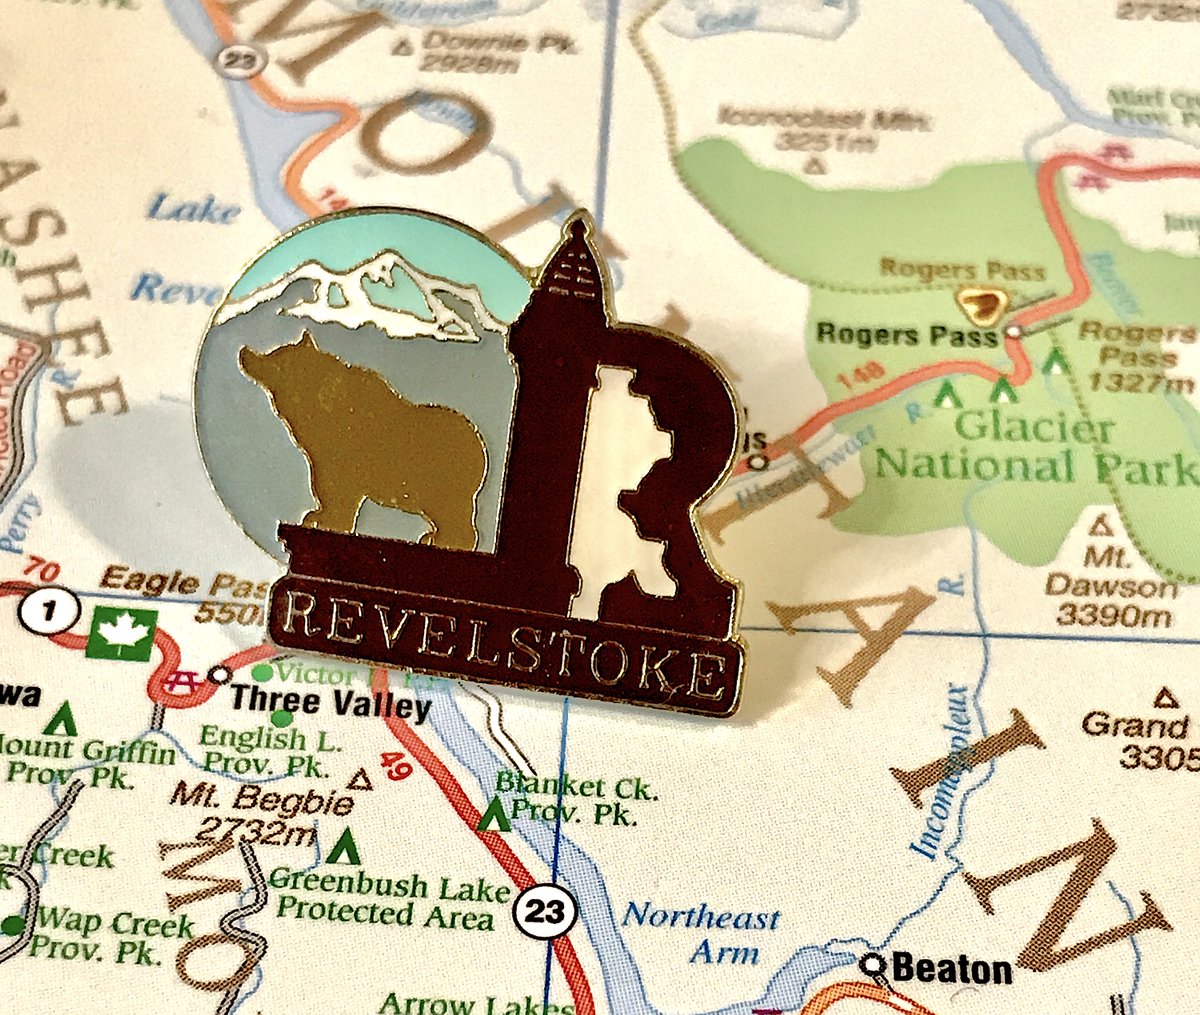 55. REVELSTOKE - Is the bear howling at an imaginary moon?- what is happening with that stylized r- Secondary pin is also fun, if weirdly robin hood themed for some reason